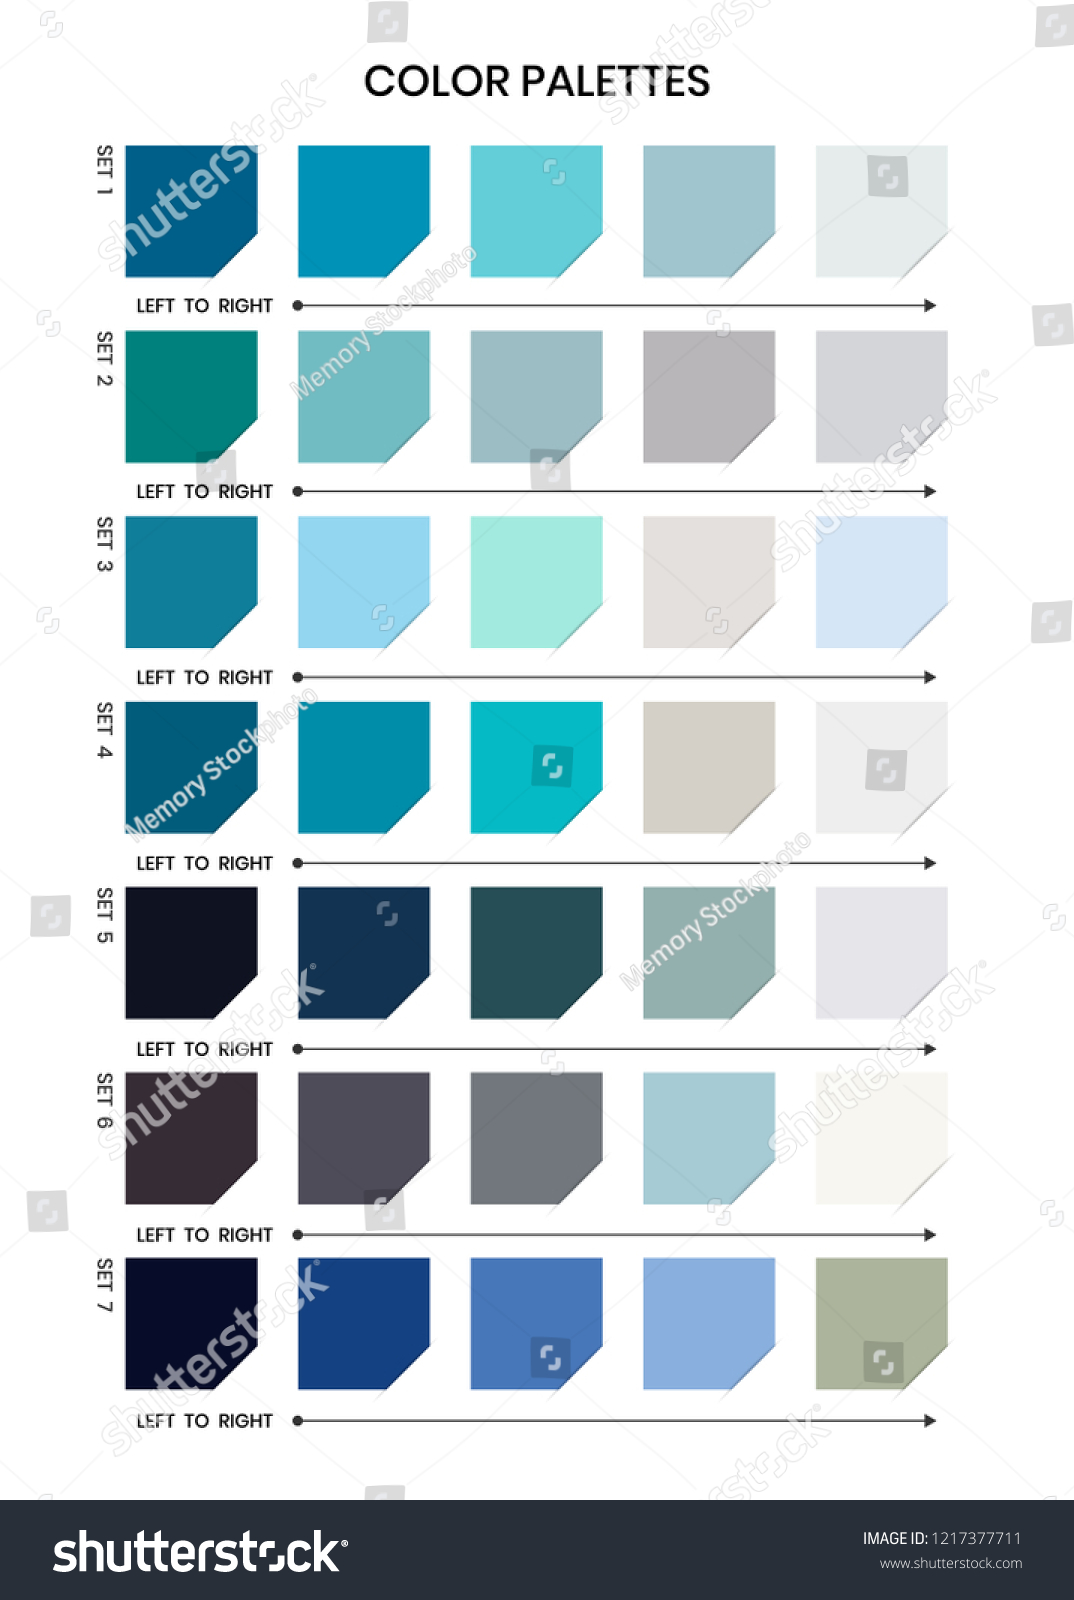 Color Palettes Vector Stock Vector (Royalty Free) 1217377711